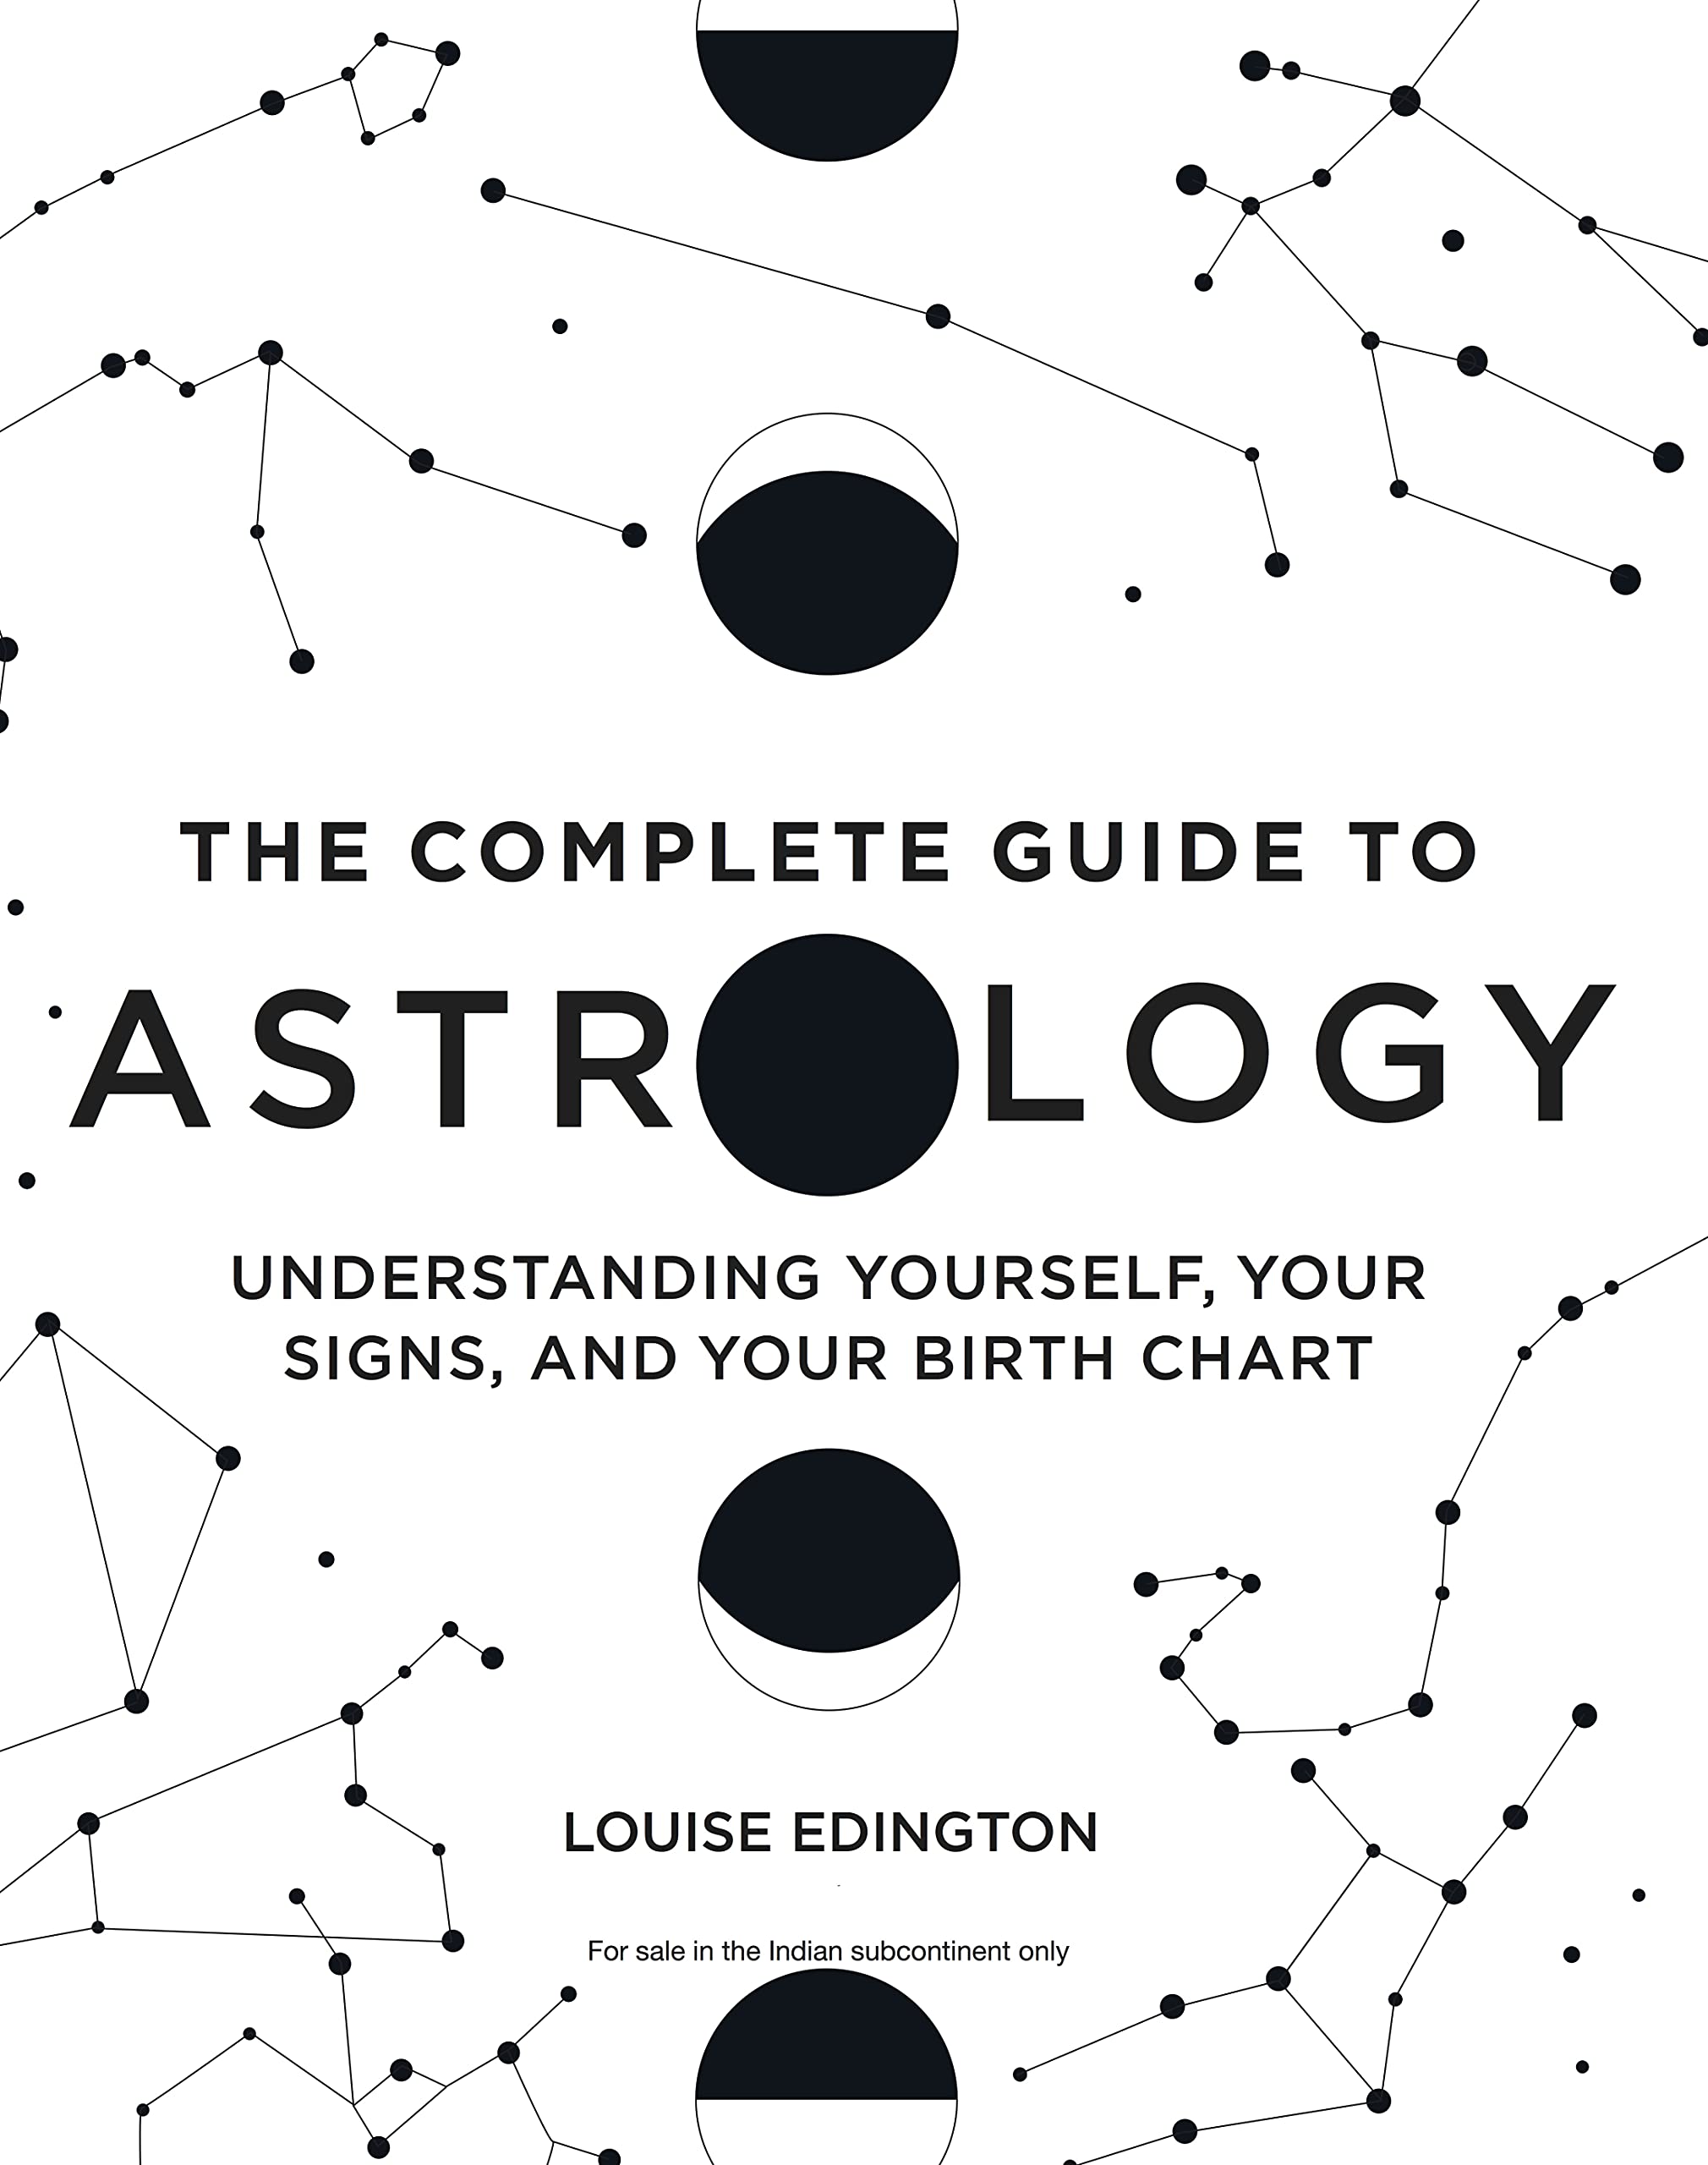 THE COMPLETE GUIDE TO ASTROLOGY:"Understanding Yourself, Your Signs, and Your Birth  Chart"